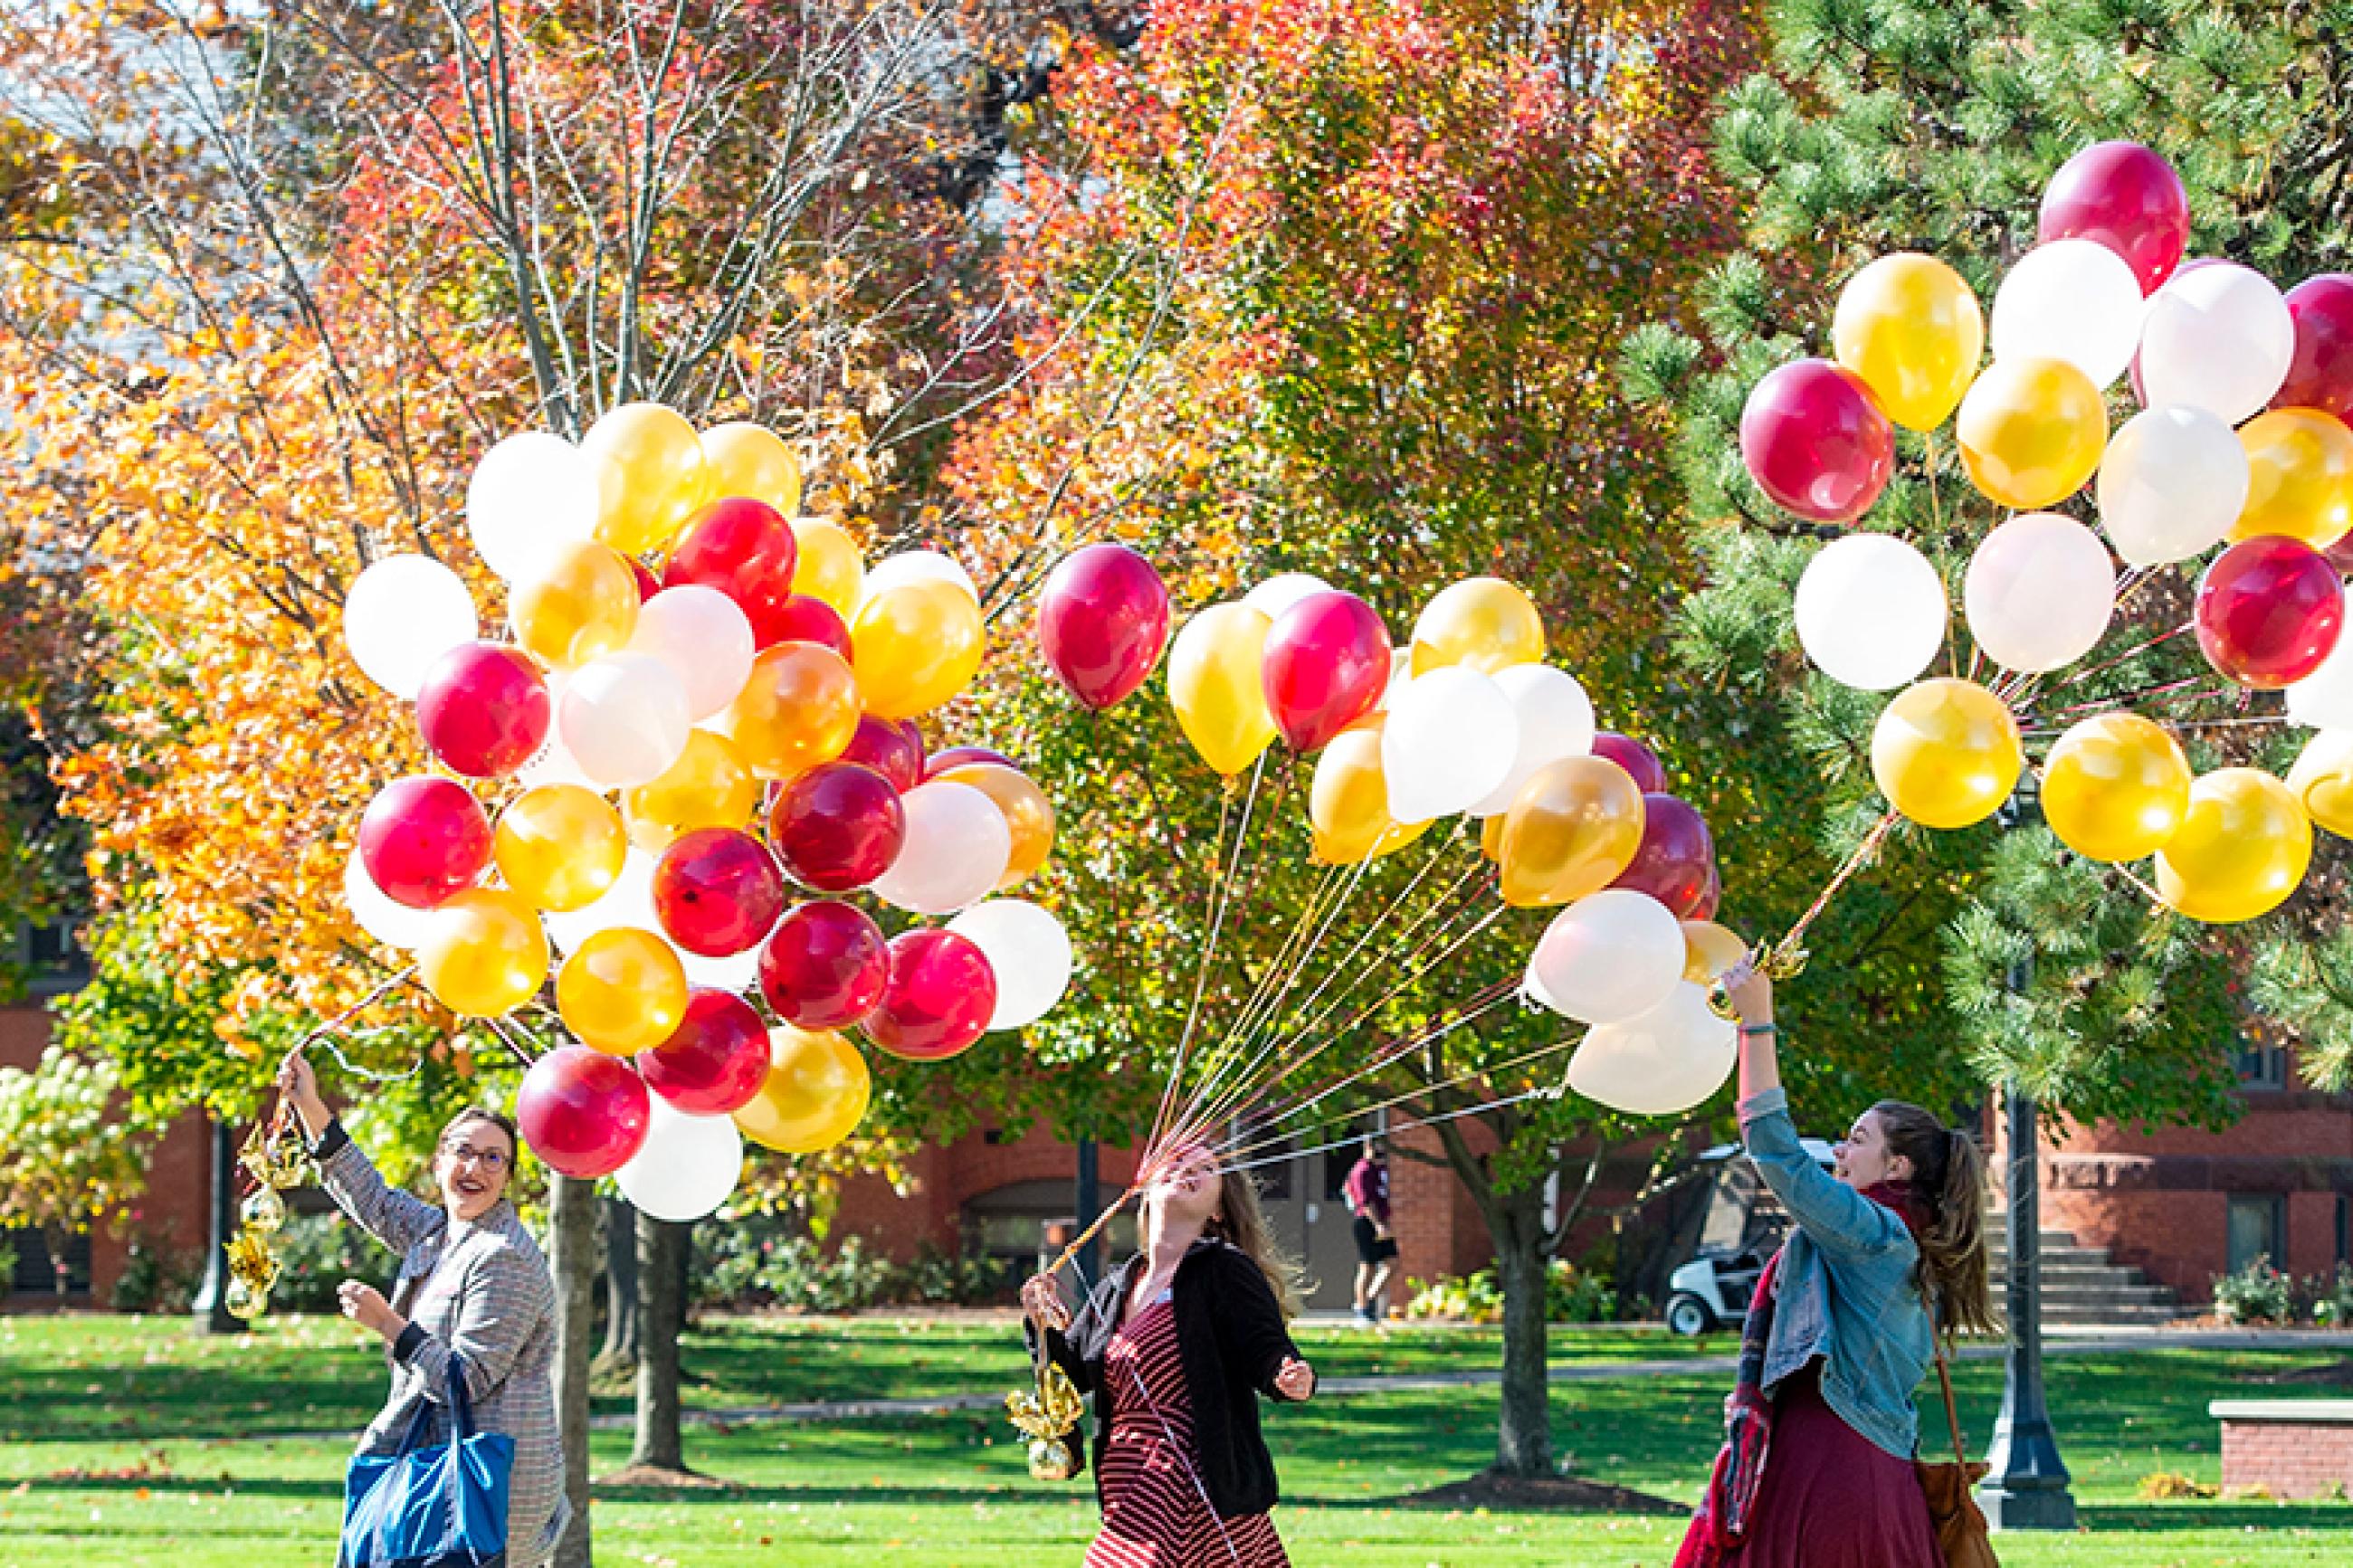 Balloons carried by admissions staff